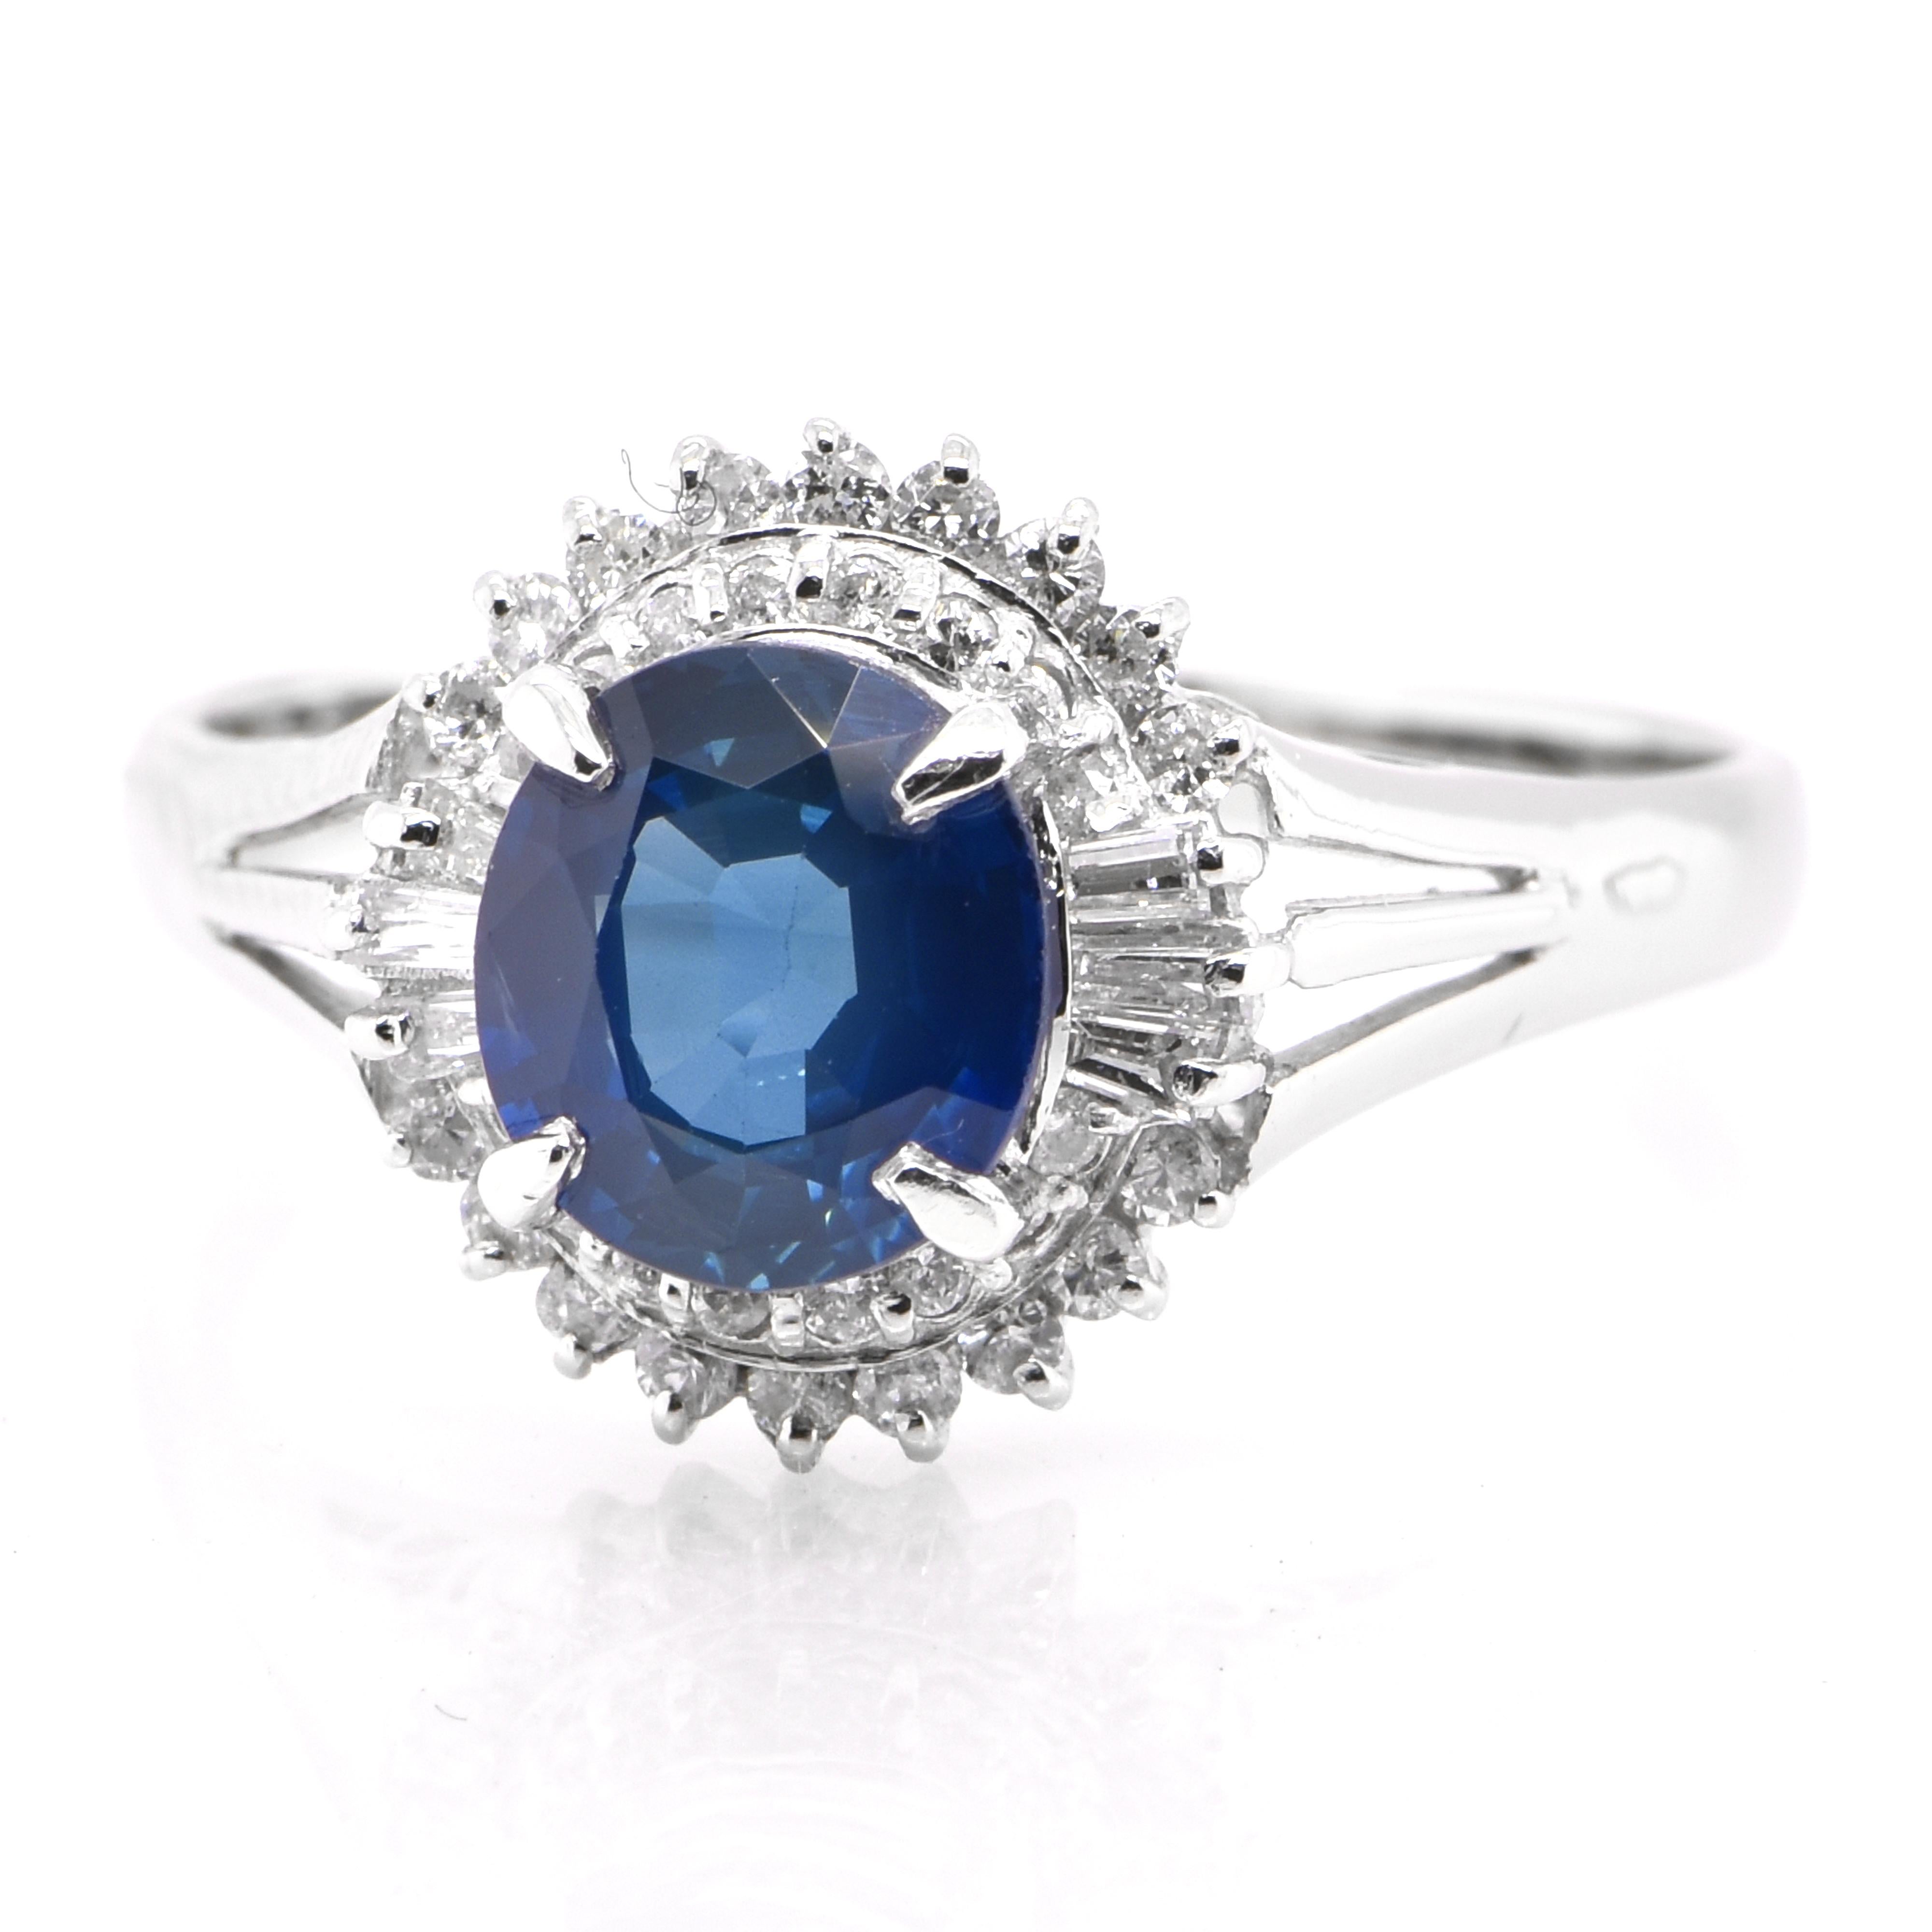 A beautiful ring featuring 1.57 Carat Natural Blue Sapphire and 0.32 Carats Diamond Accents set in Platinum. Sapphires have extraordinary durability - they excel in hardness as well as toughness and durability making them very popular in jewelry.